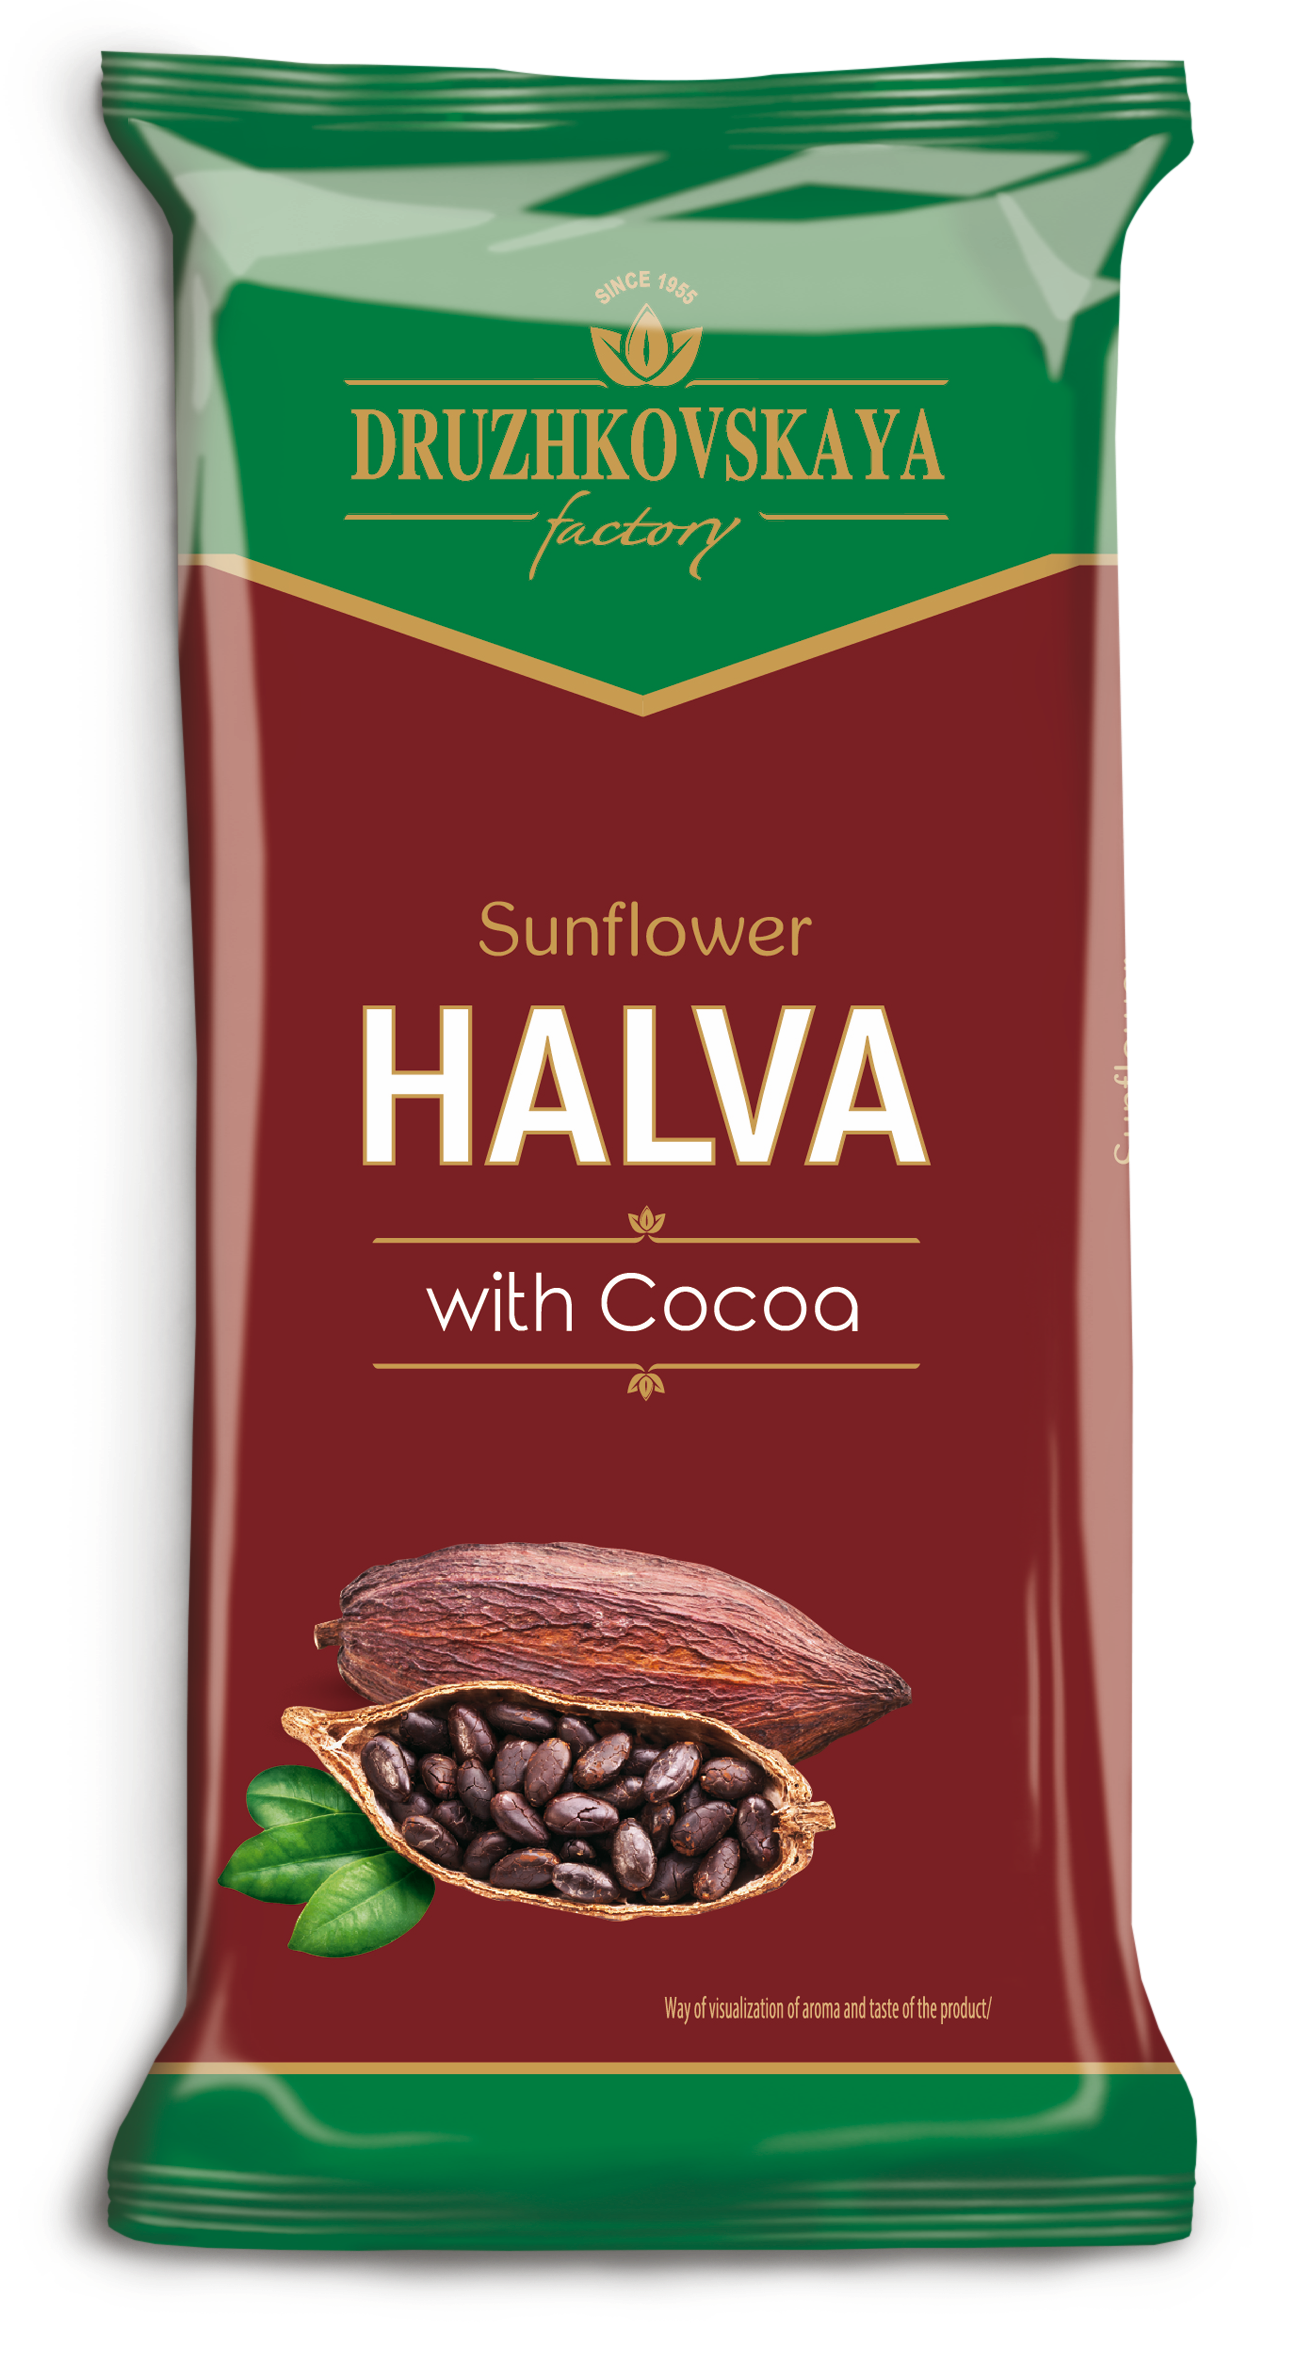 Sunflower Halva with Cocoa Packed in Flow-pack, 300 g